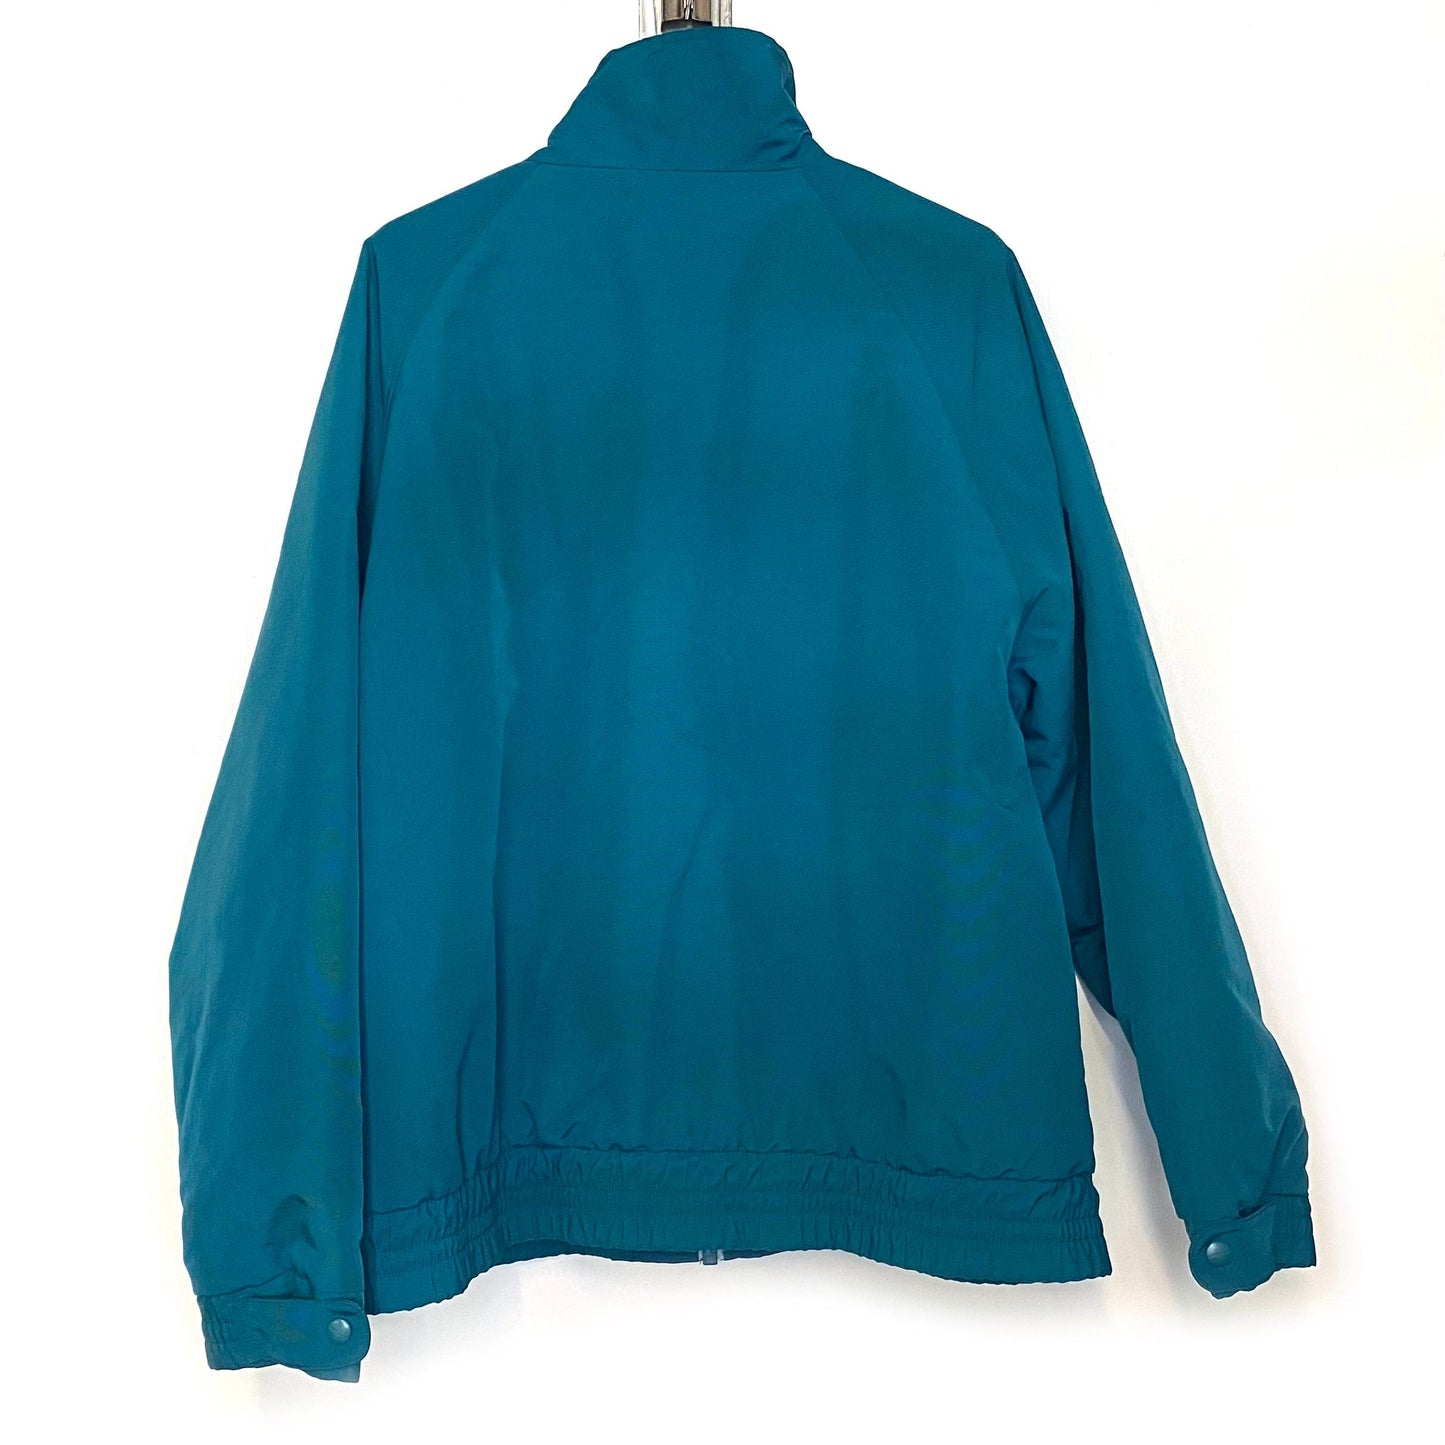 Vintage Carhartt J72 Workshield Squall Jacket - Fleece Lined, 2XL Teal Green L/s Pre-Owned